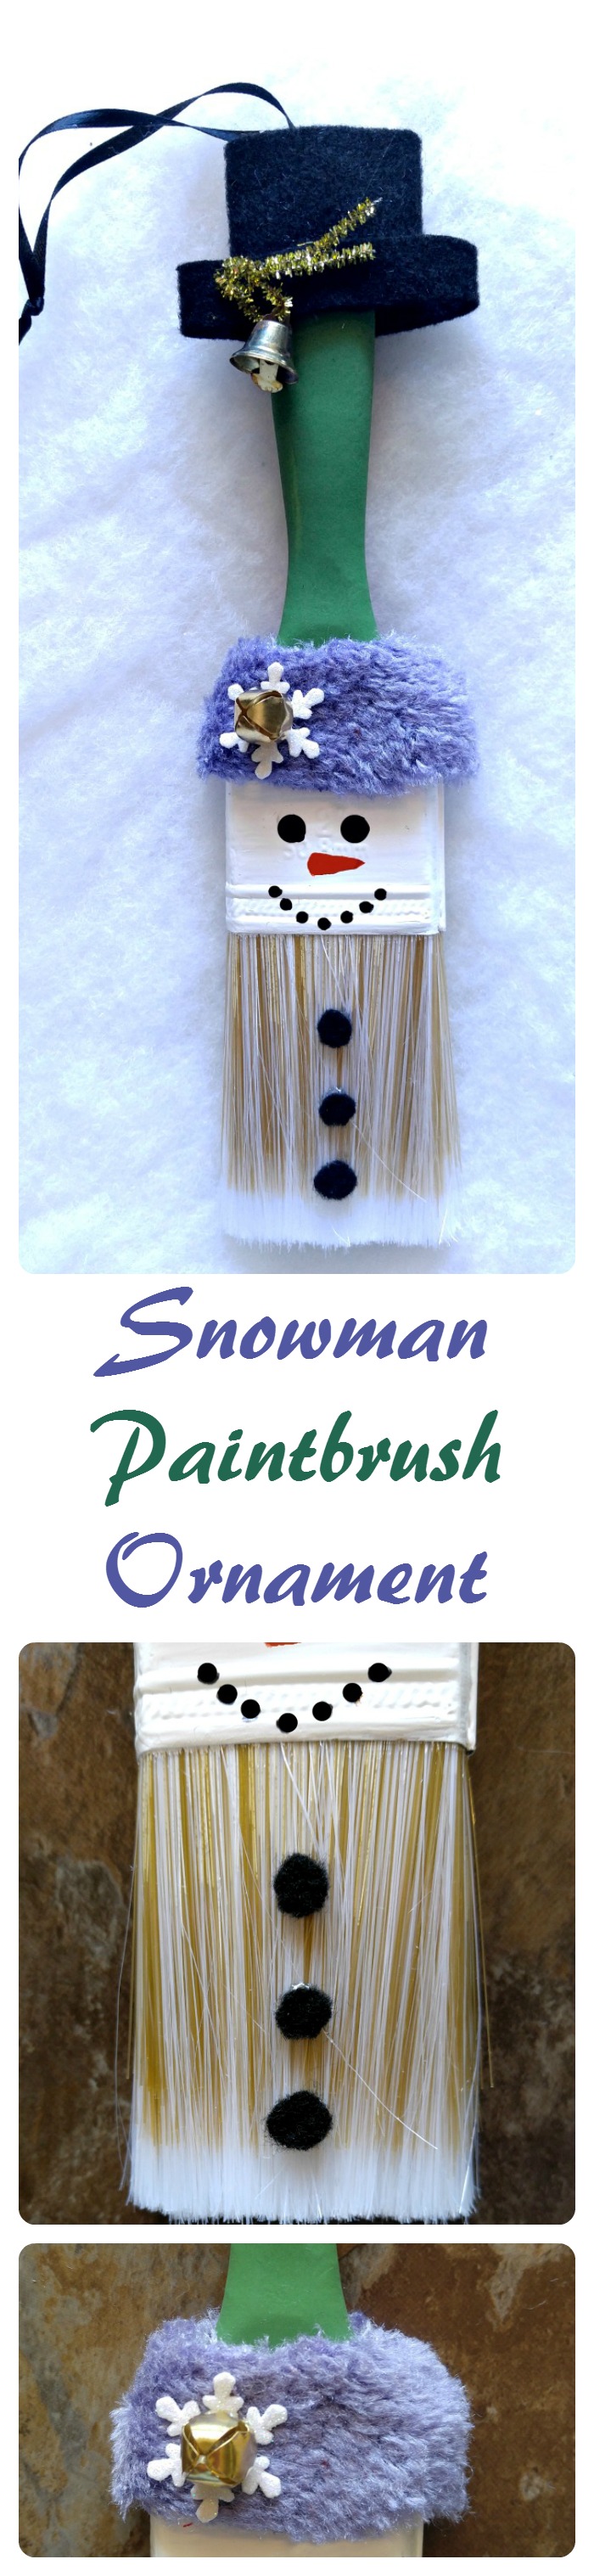 This adorable Snowman Paintbrush Ornament is sure to become a family favorite. It is easy to make and can be hung on a tree or used as a wall hanging.